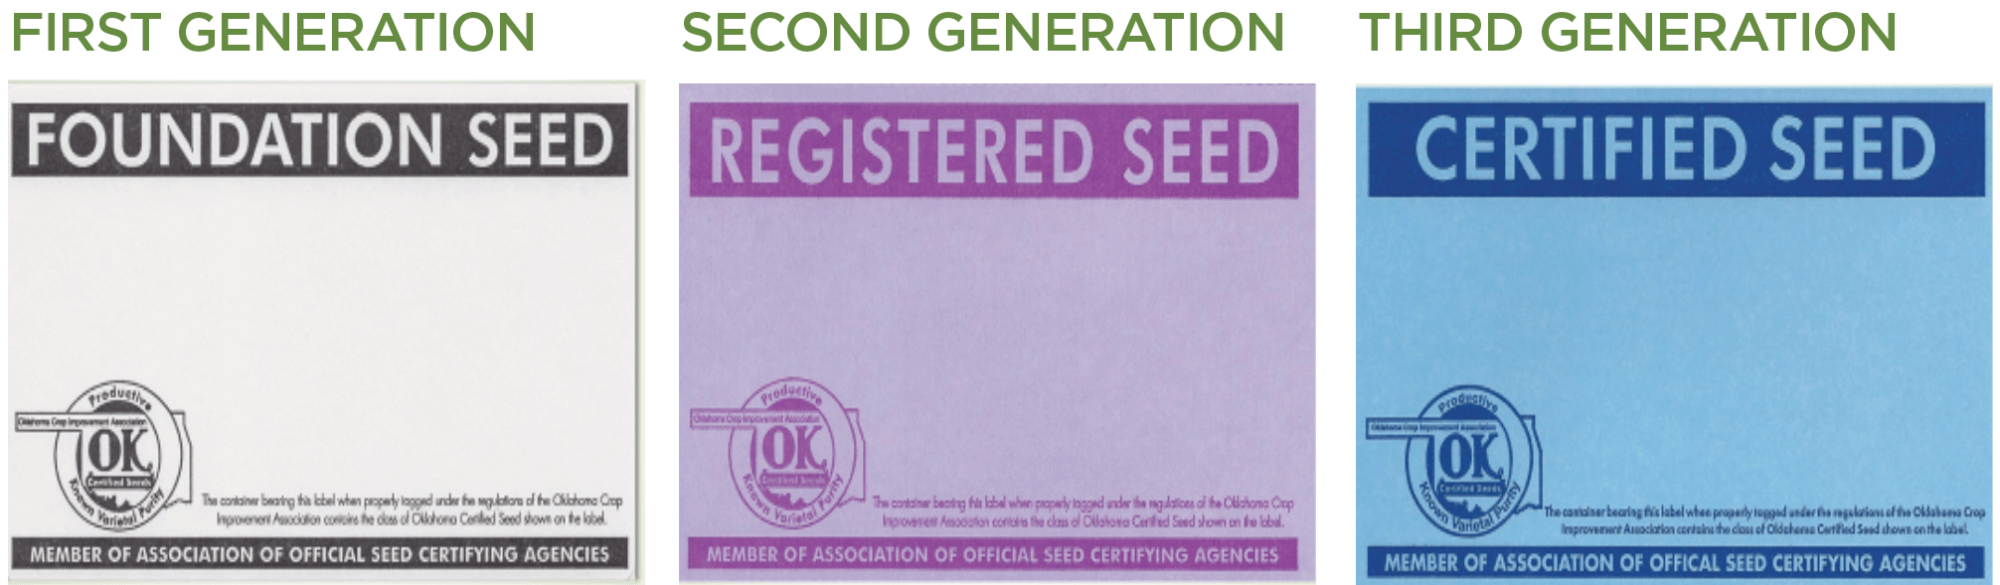 Seed classification color code